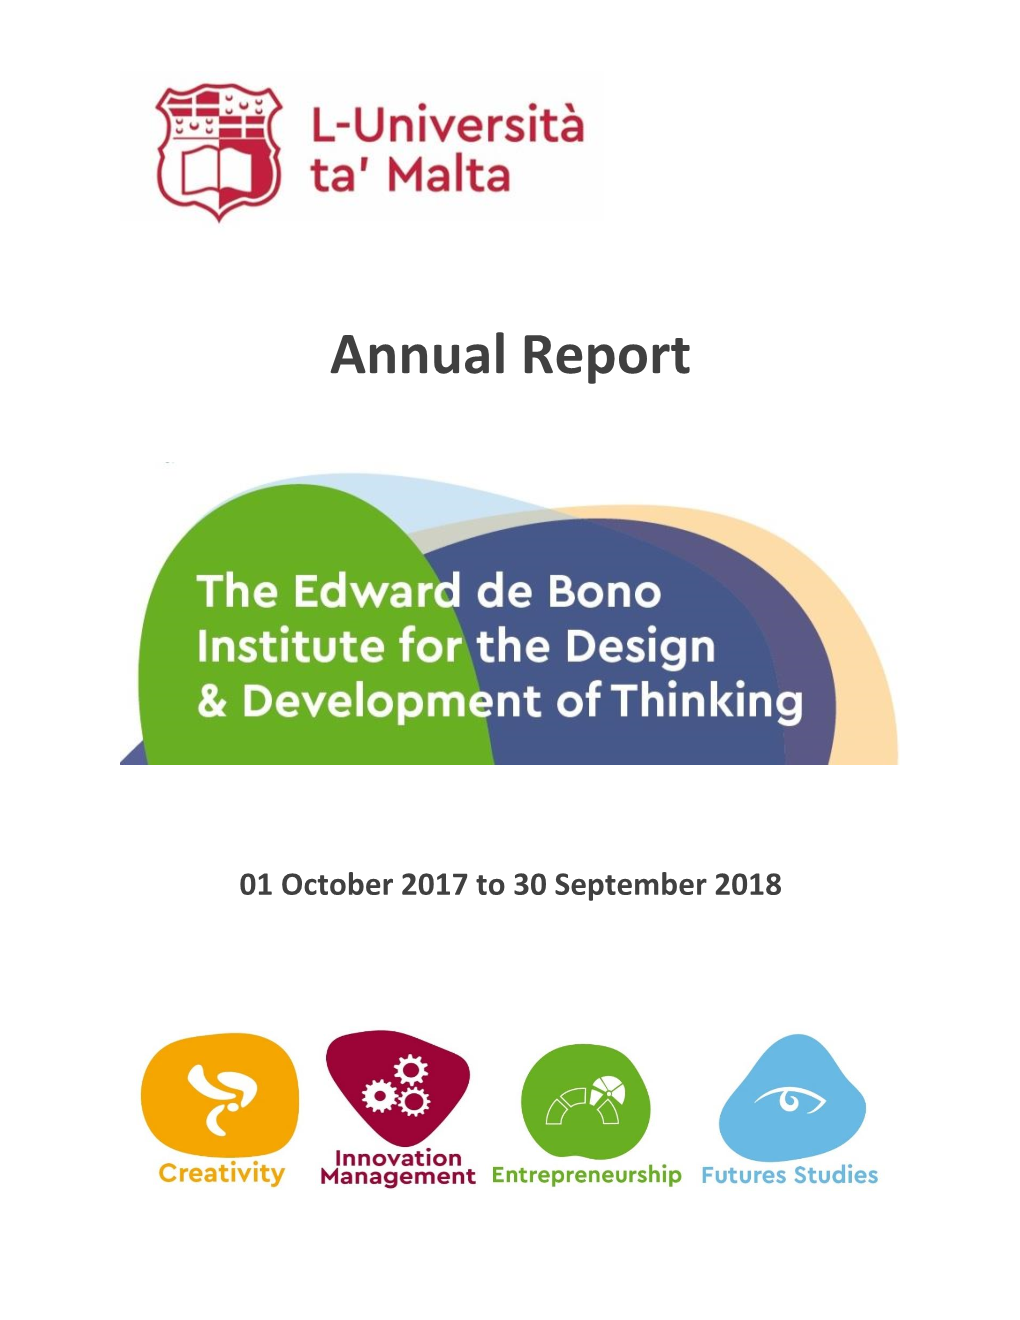 Annual Report for 2017-2018